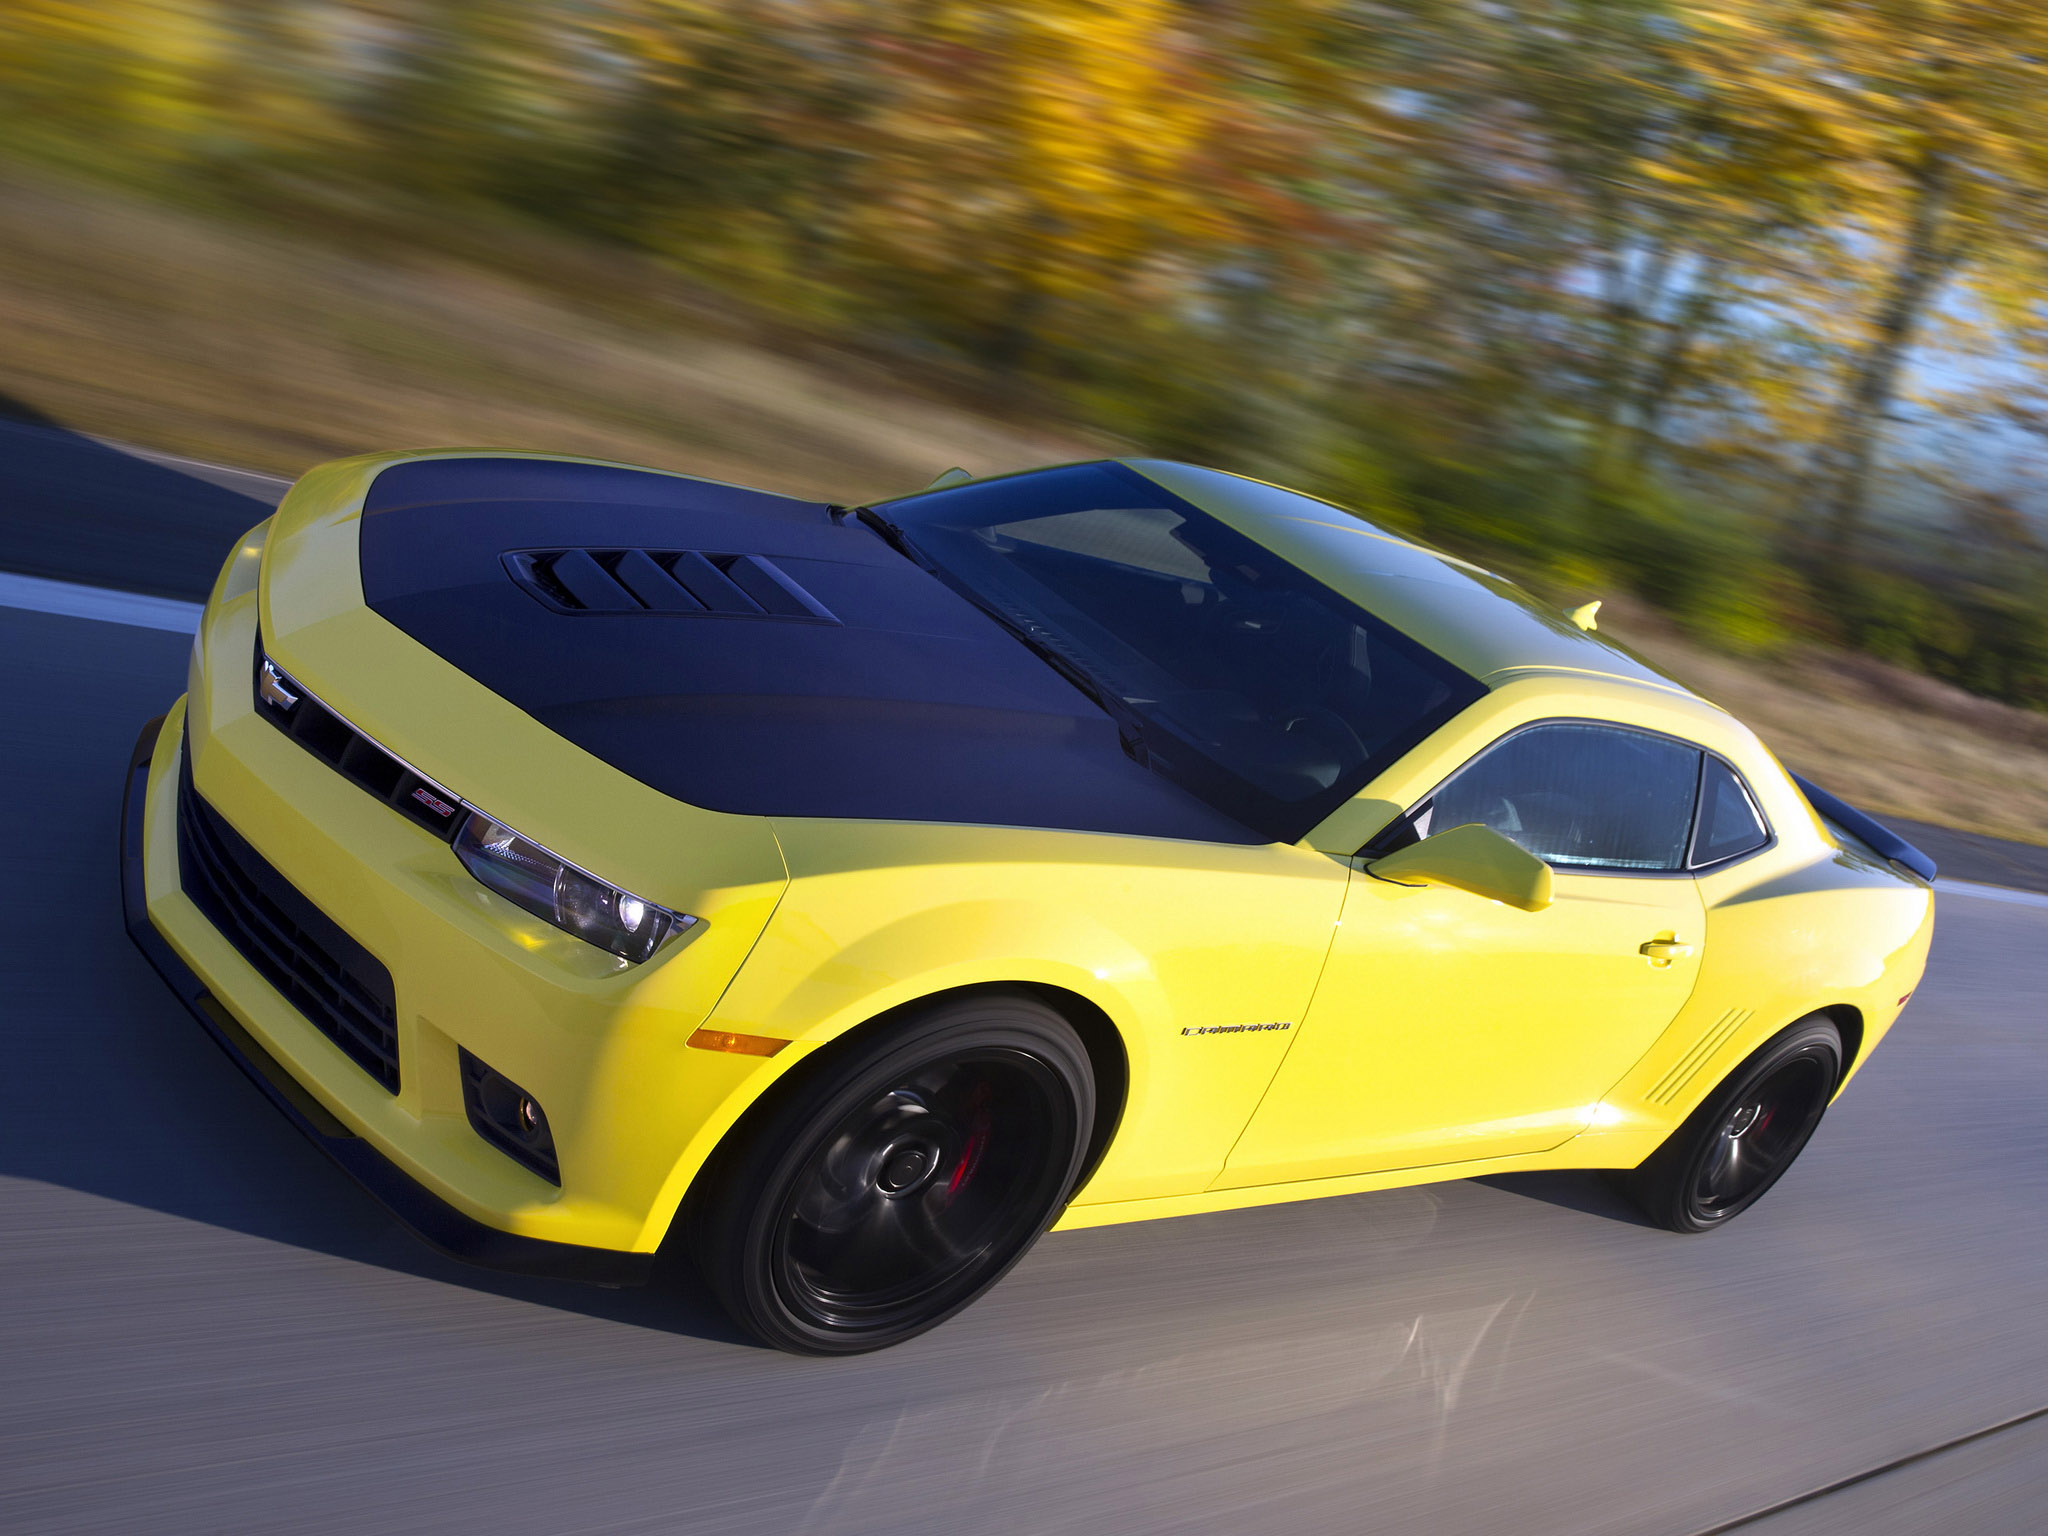 2014, Chevrolet, Camaro, Ss, 1le, Muscle, S s Wallpaper